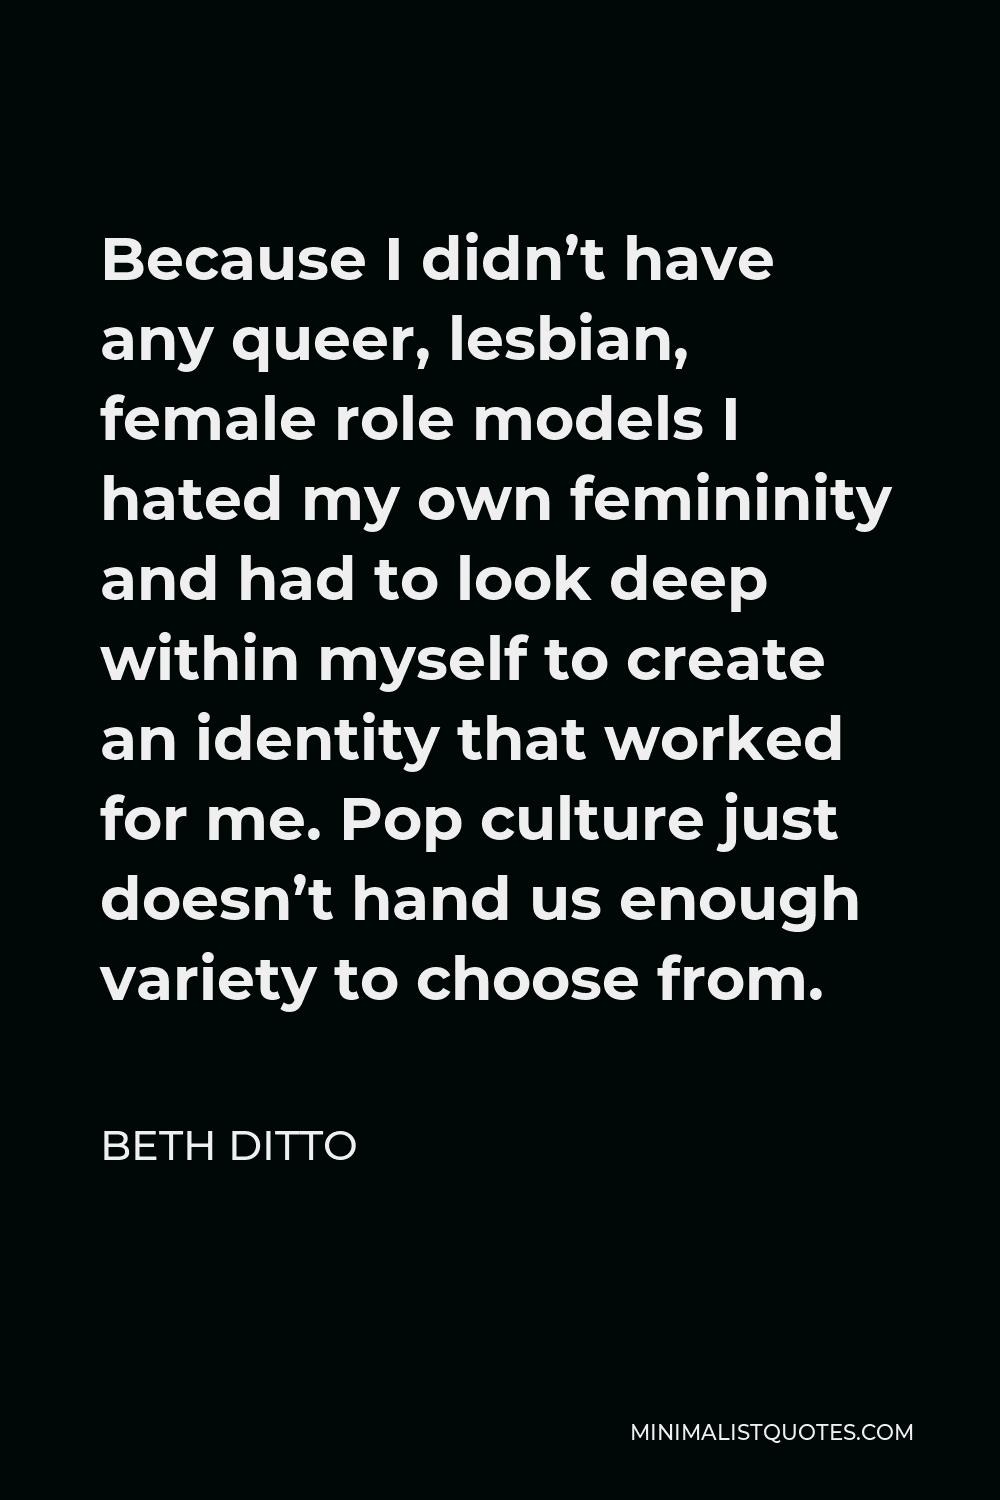 Beth Ditto Quote - Because I didn’t have any queer, lesbian, female role models I hated my own femininity and had to look deep within myself to create an identity that worked for me. Pop culture just doesn’t hand us enough variety to choose from.